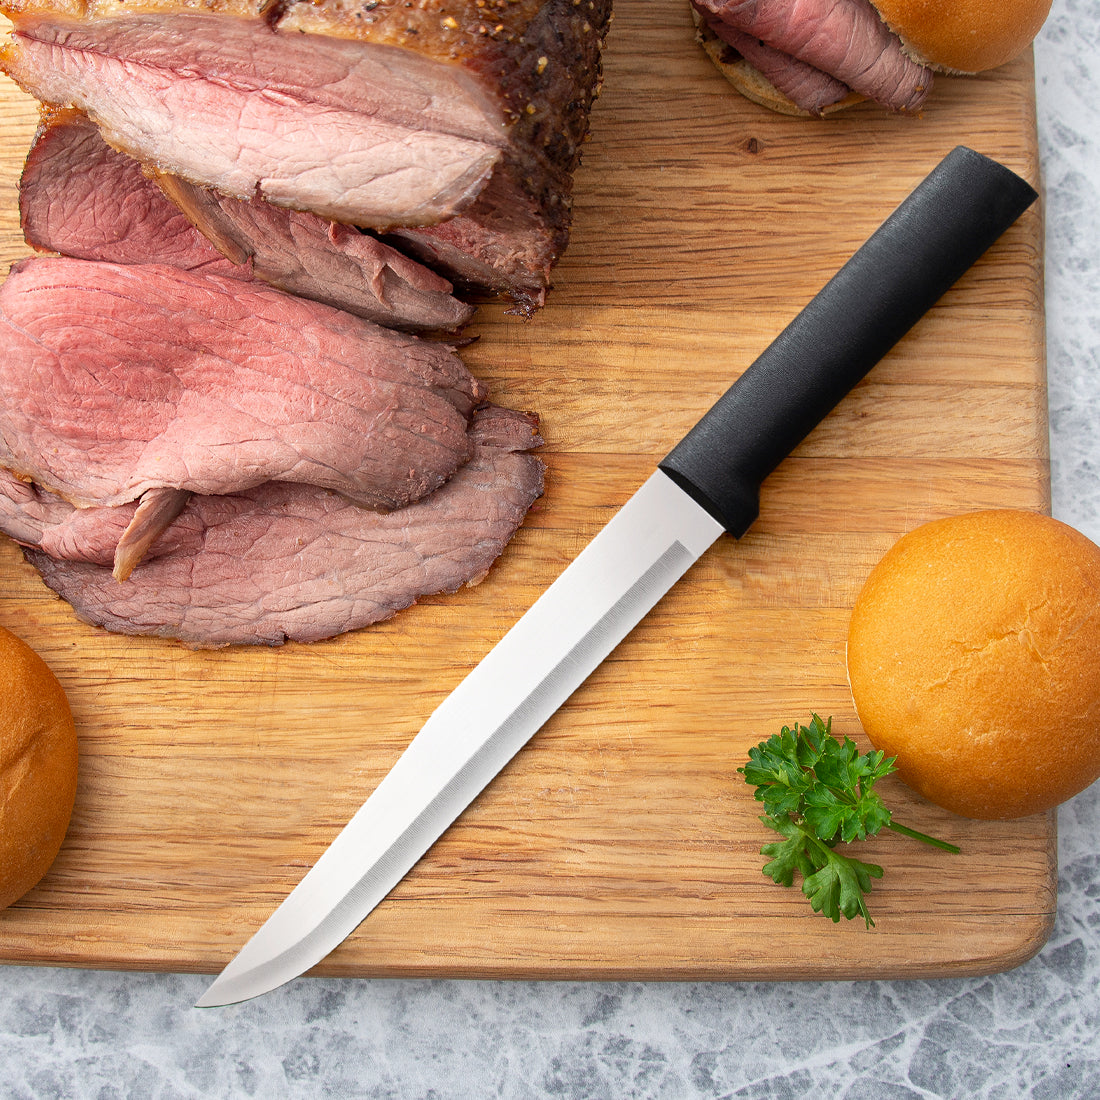 A silver handled Slicer on a cutting board with sliced roast beef and hamburger buns.